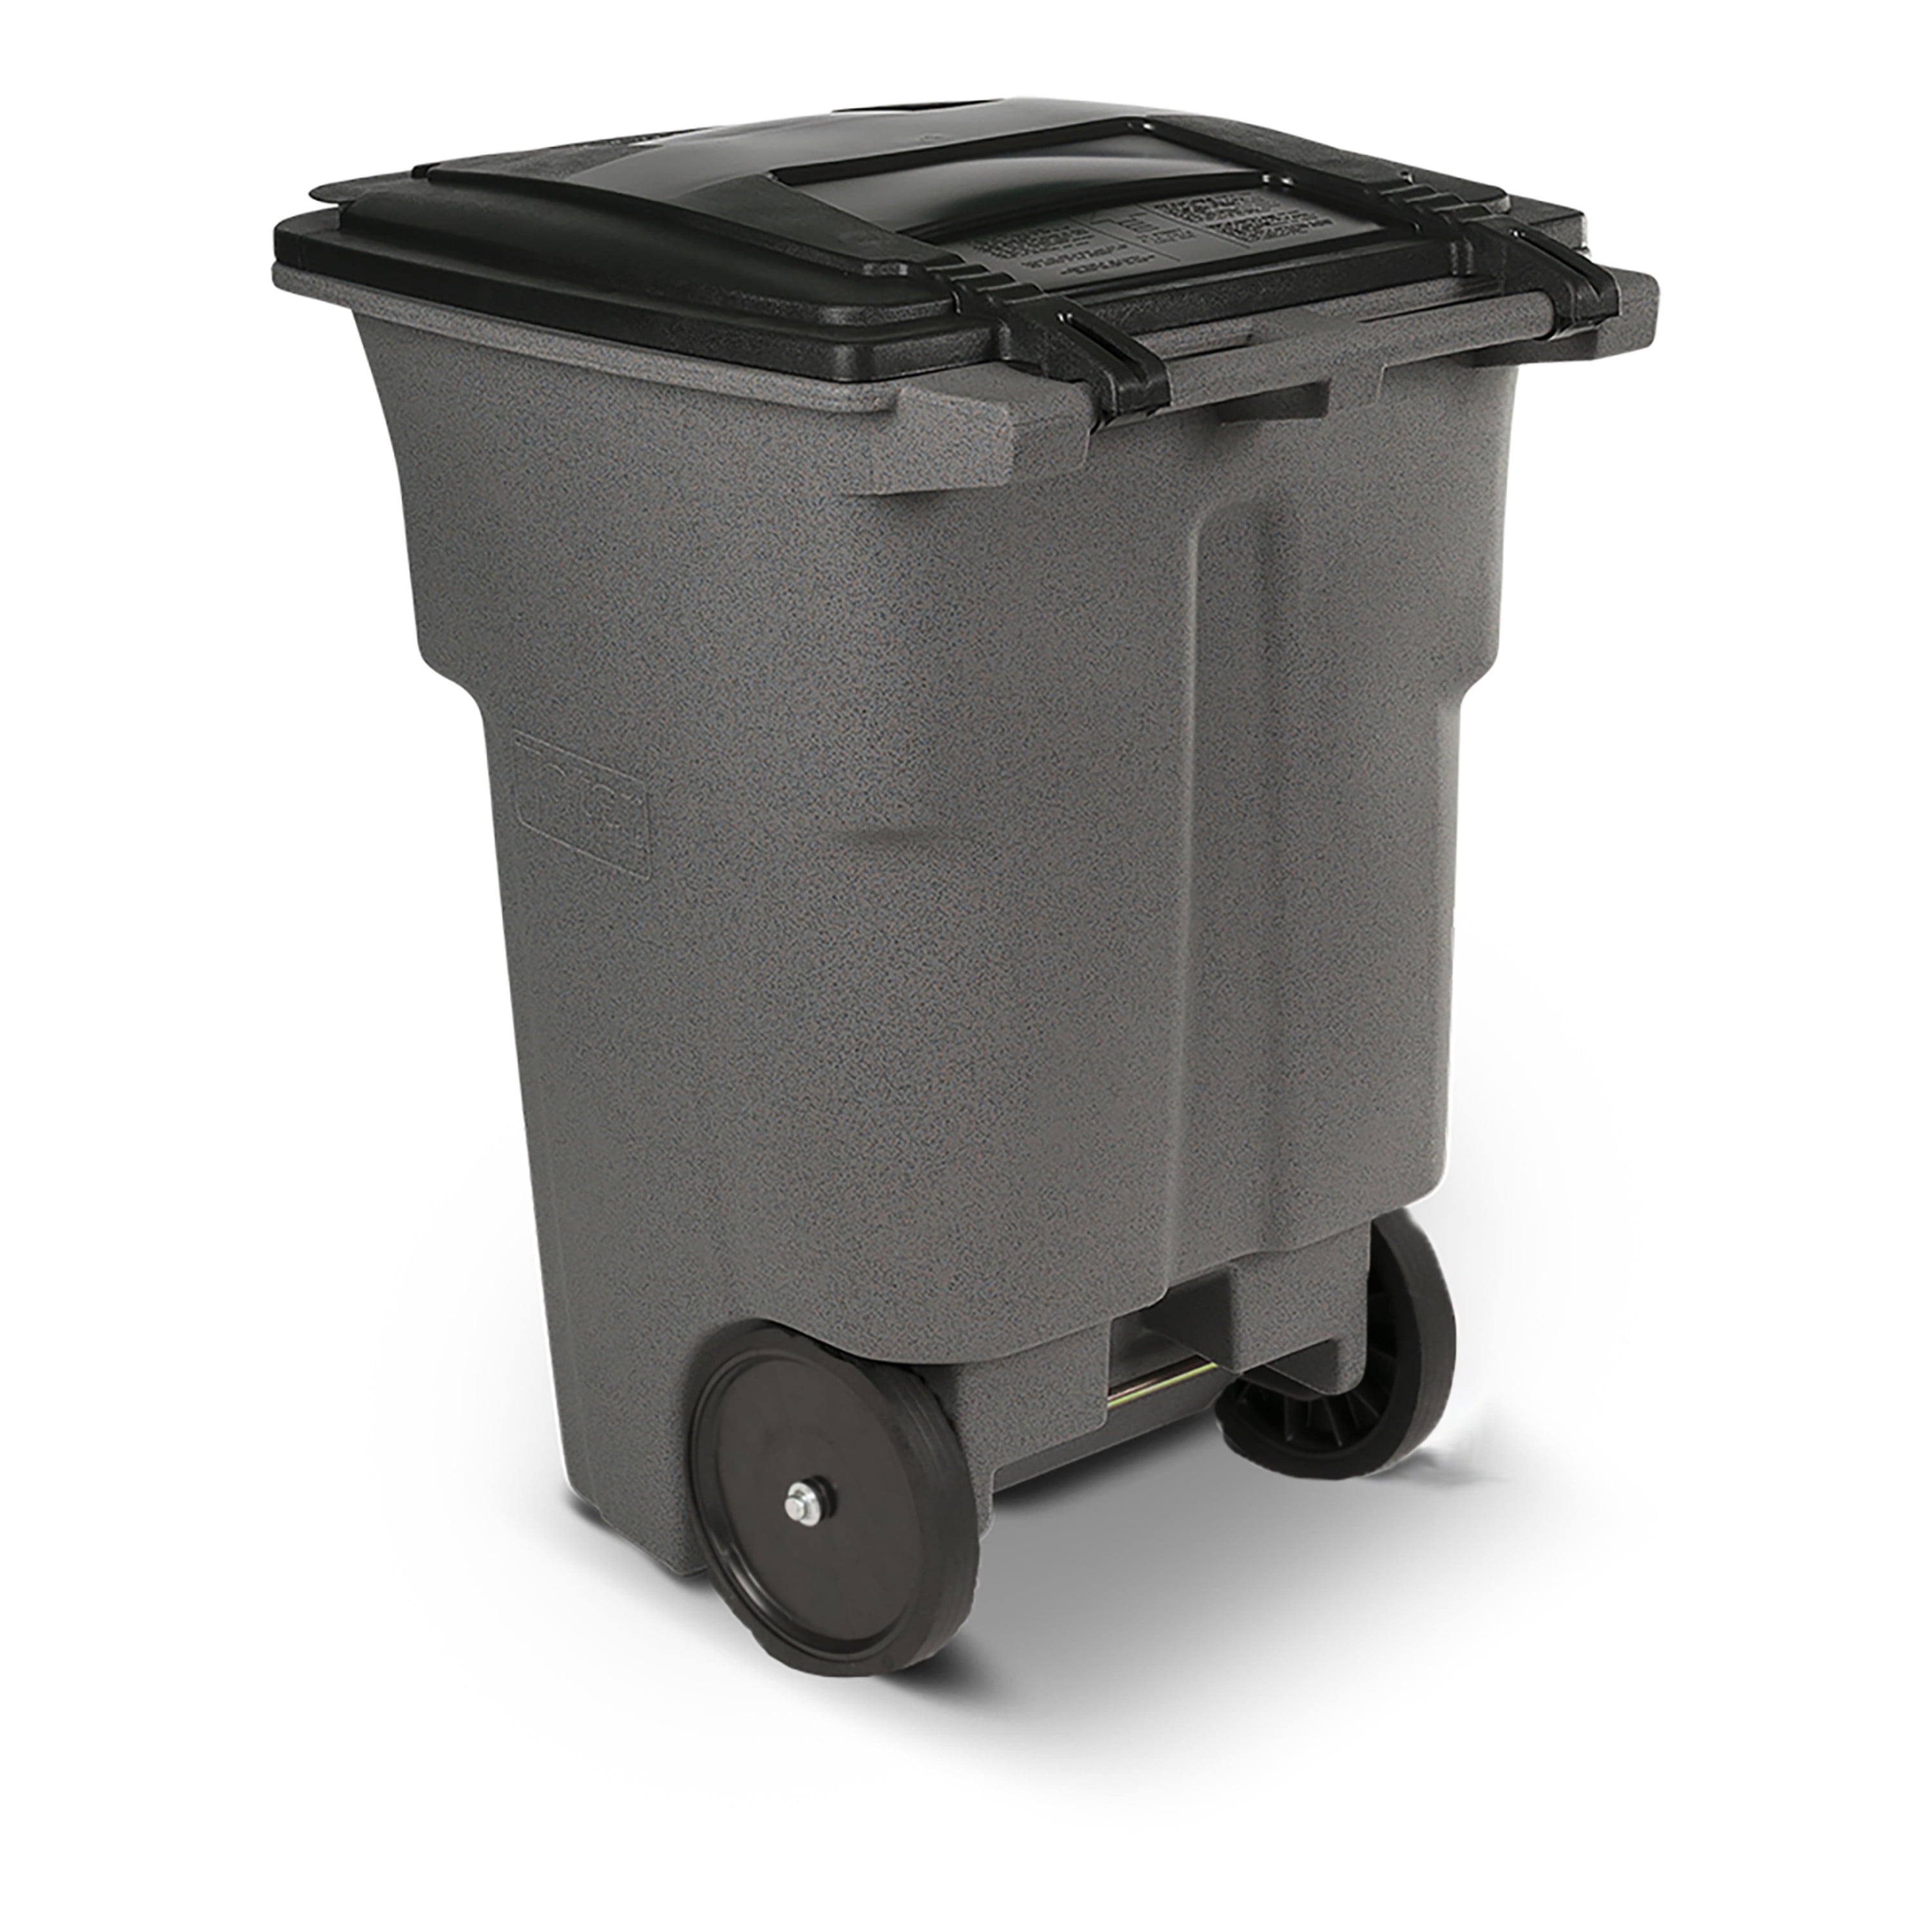 8 Best Wheeled Trash Cans 2017 